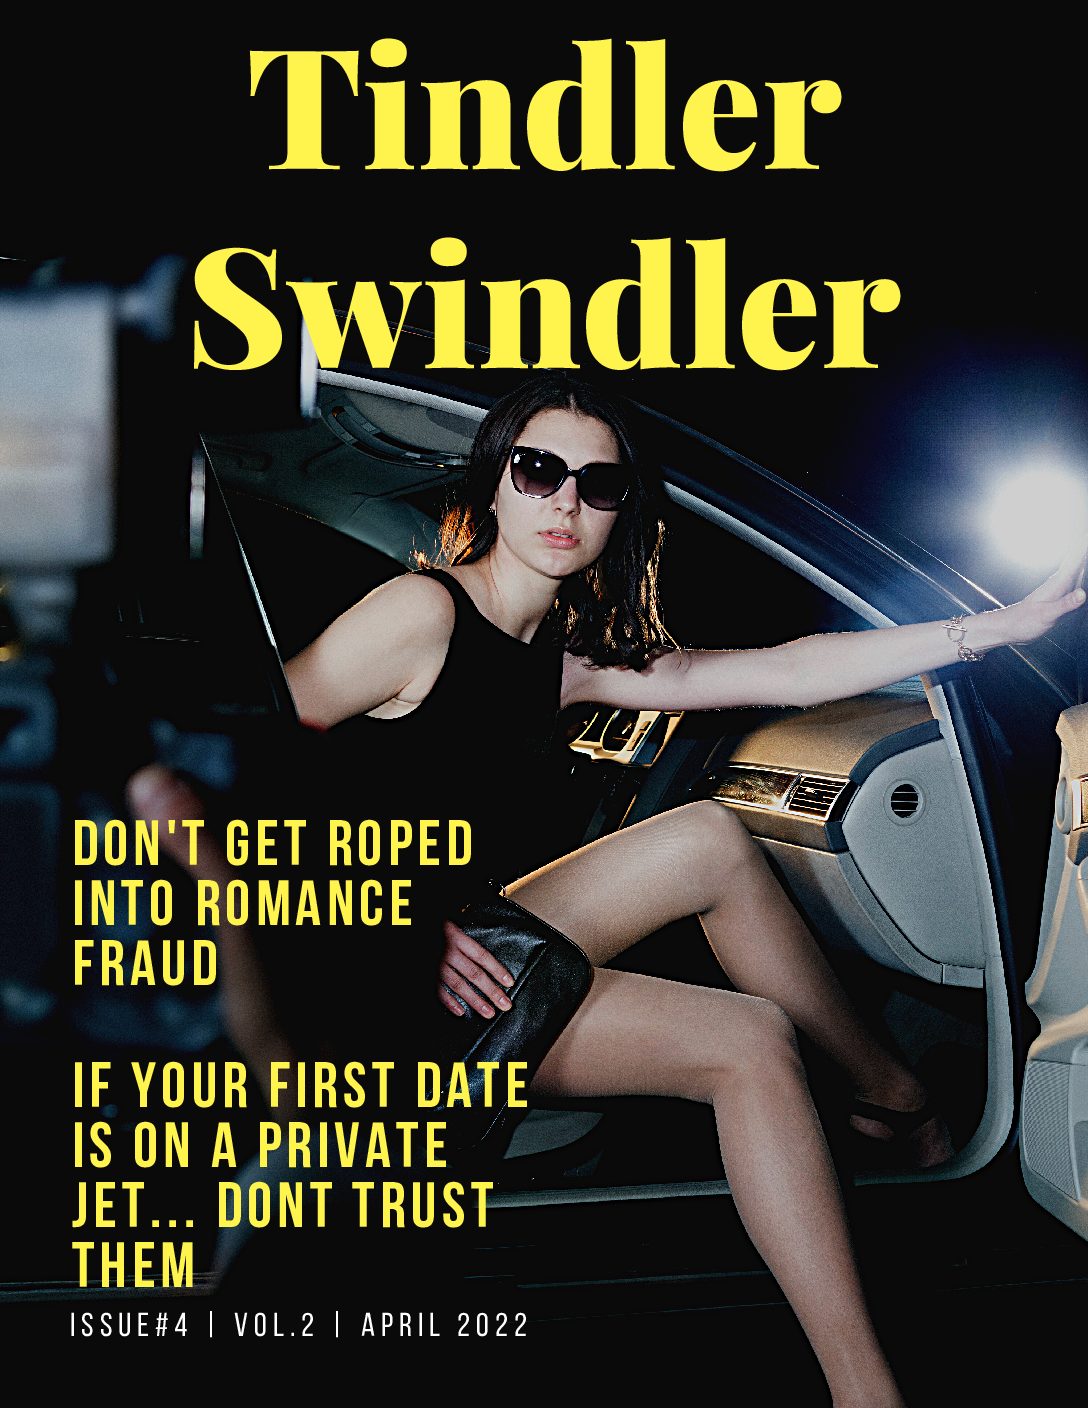 Romance Fraud & How Not to Get Tinder Swindled